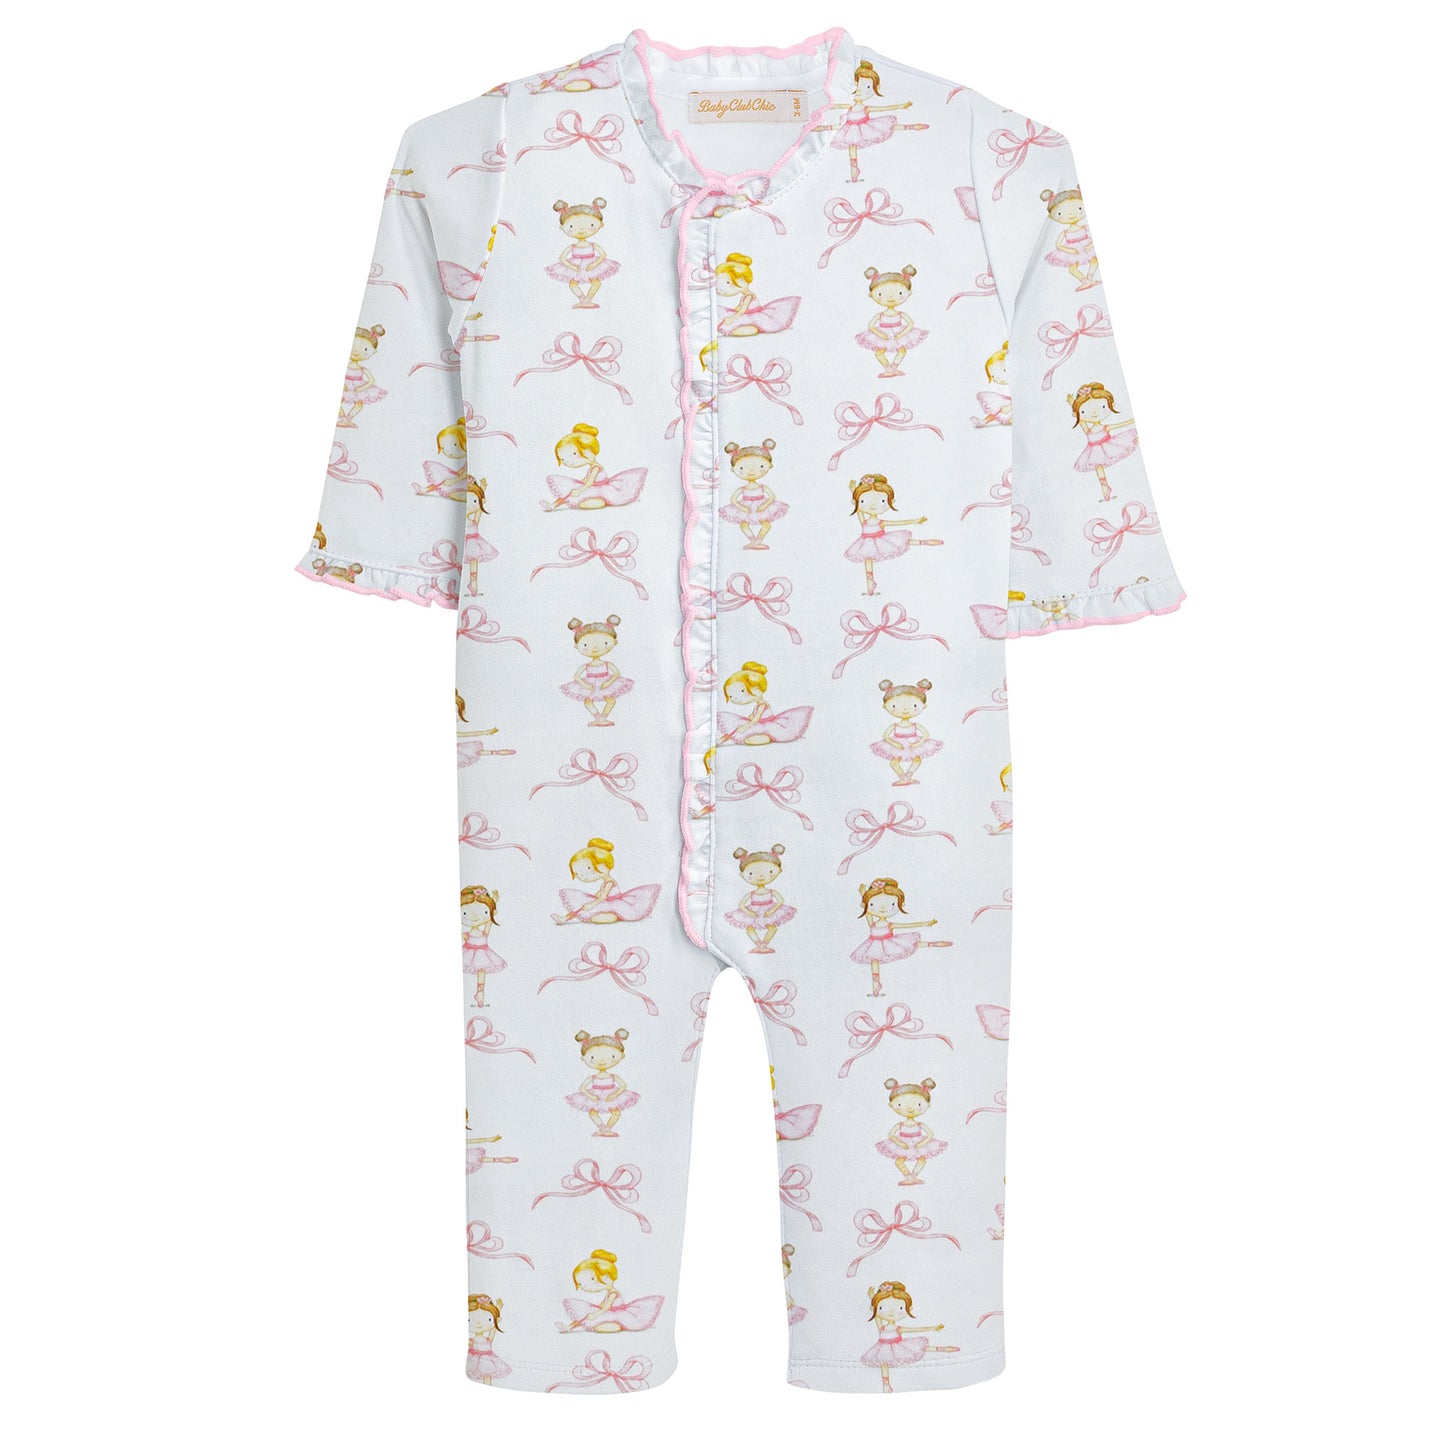 Coverall With Ruffles | Petite Dancer